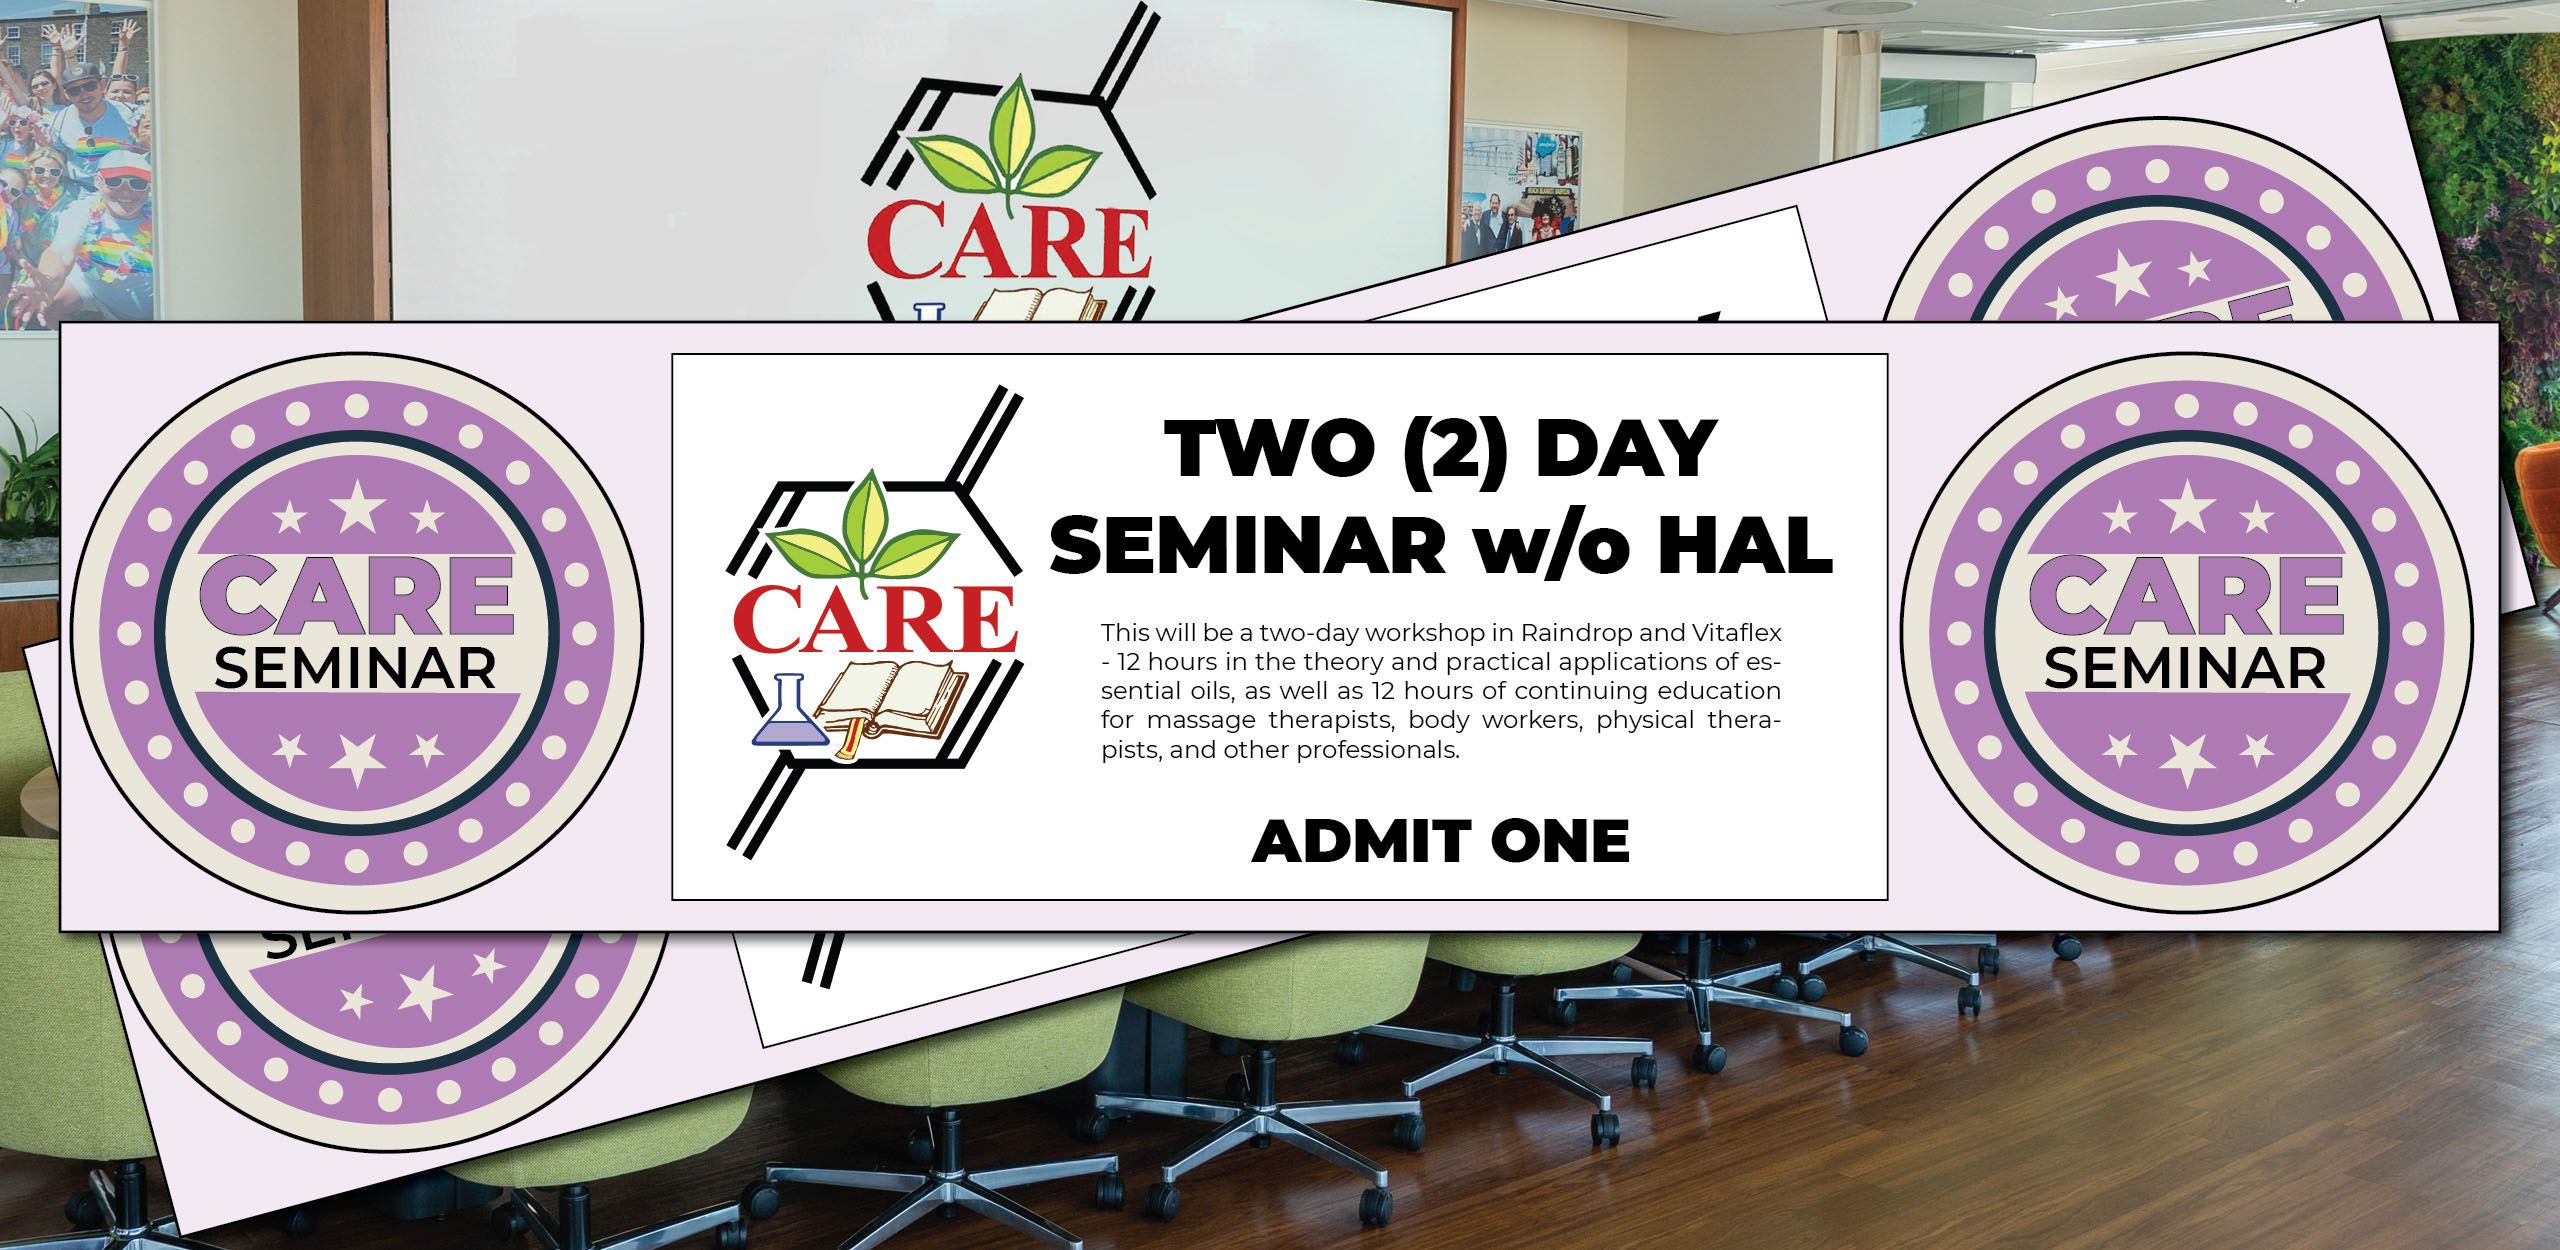 Two (2) Day Seminar without HAL